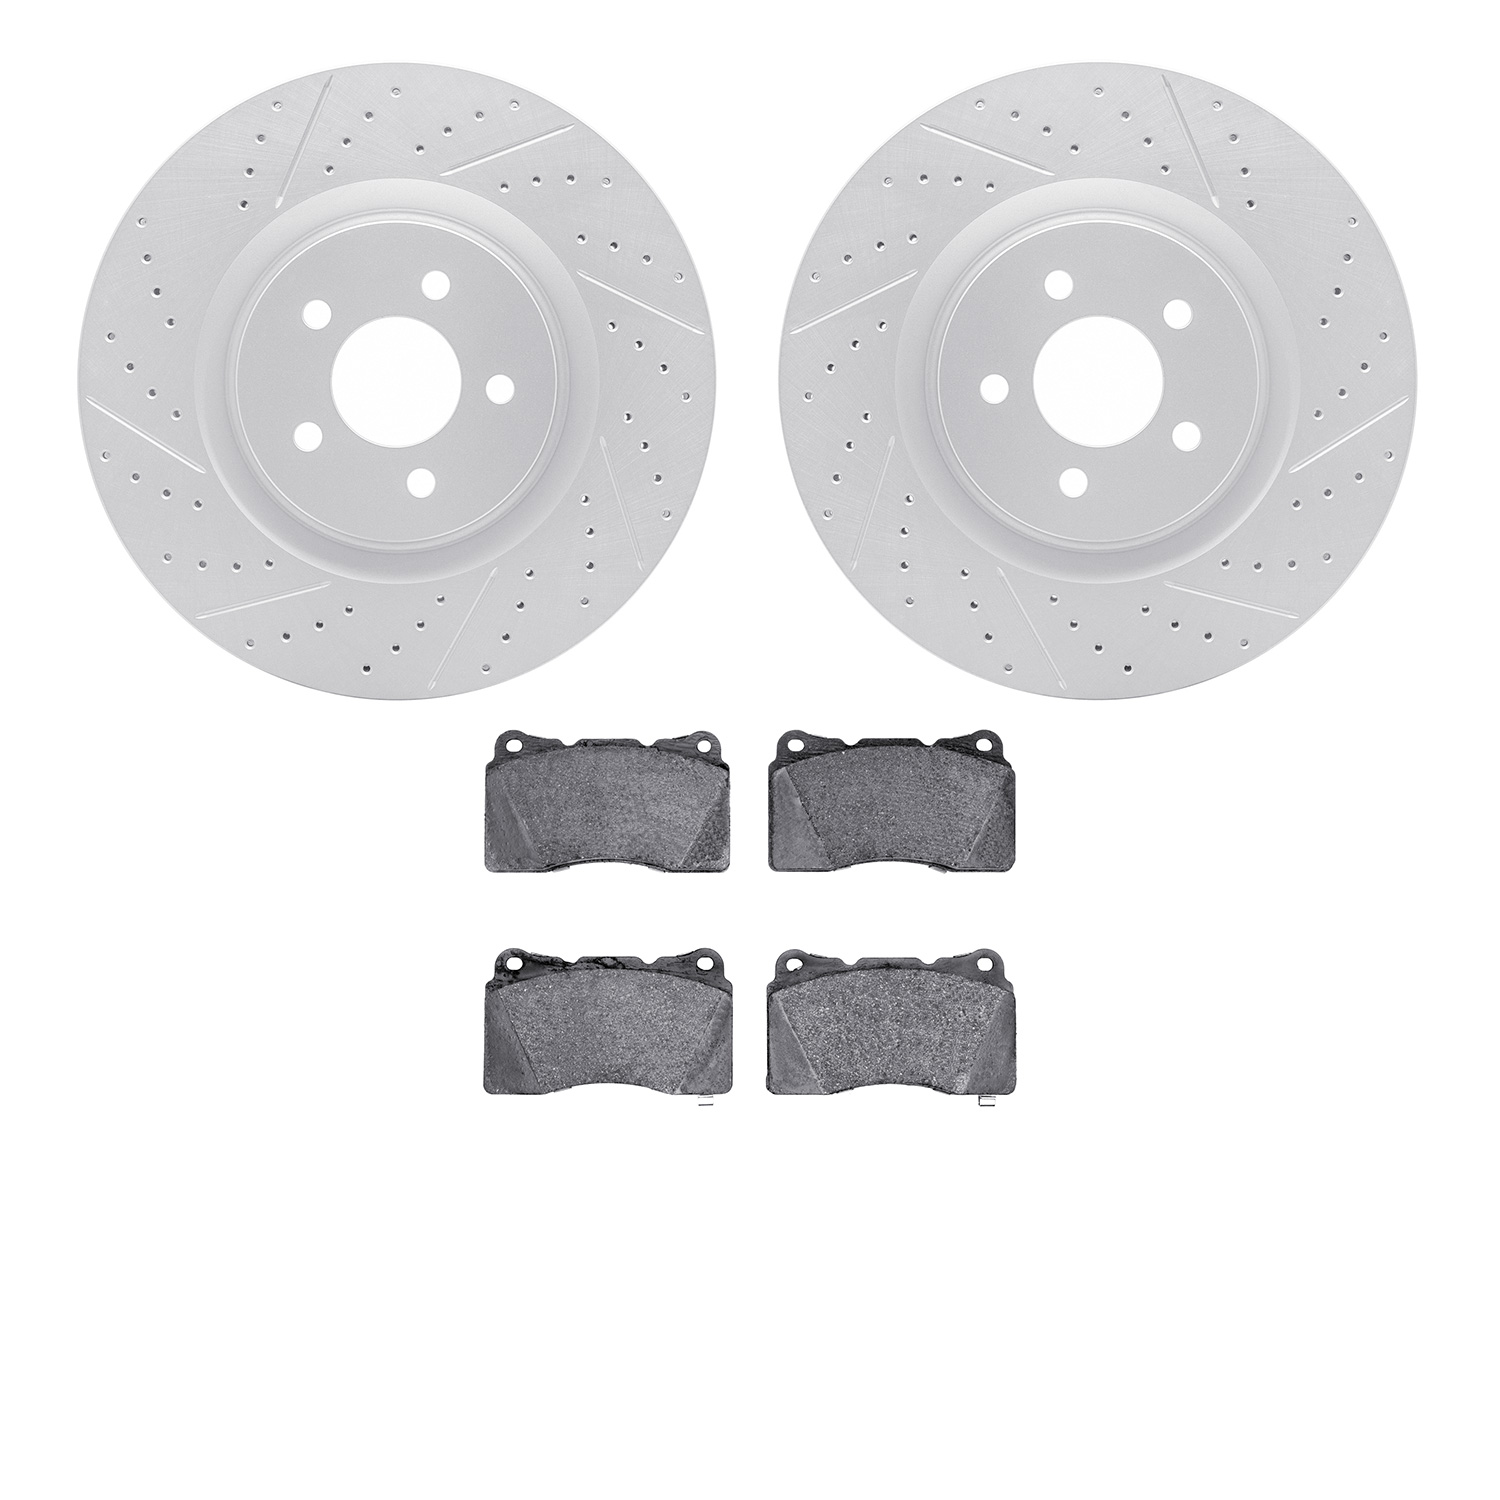 2502-54050 Geoperformance Drilled/Slotted Rotors w/5000 Advanced Brake Pads Kit, 2007-2011 Ford/Lincoln/Mercury/Mazda, Position: